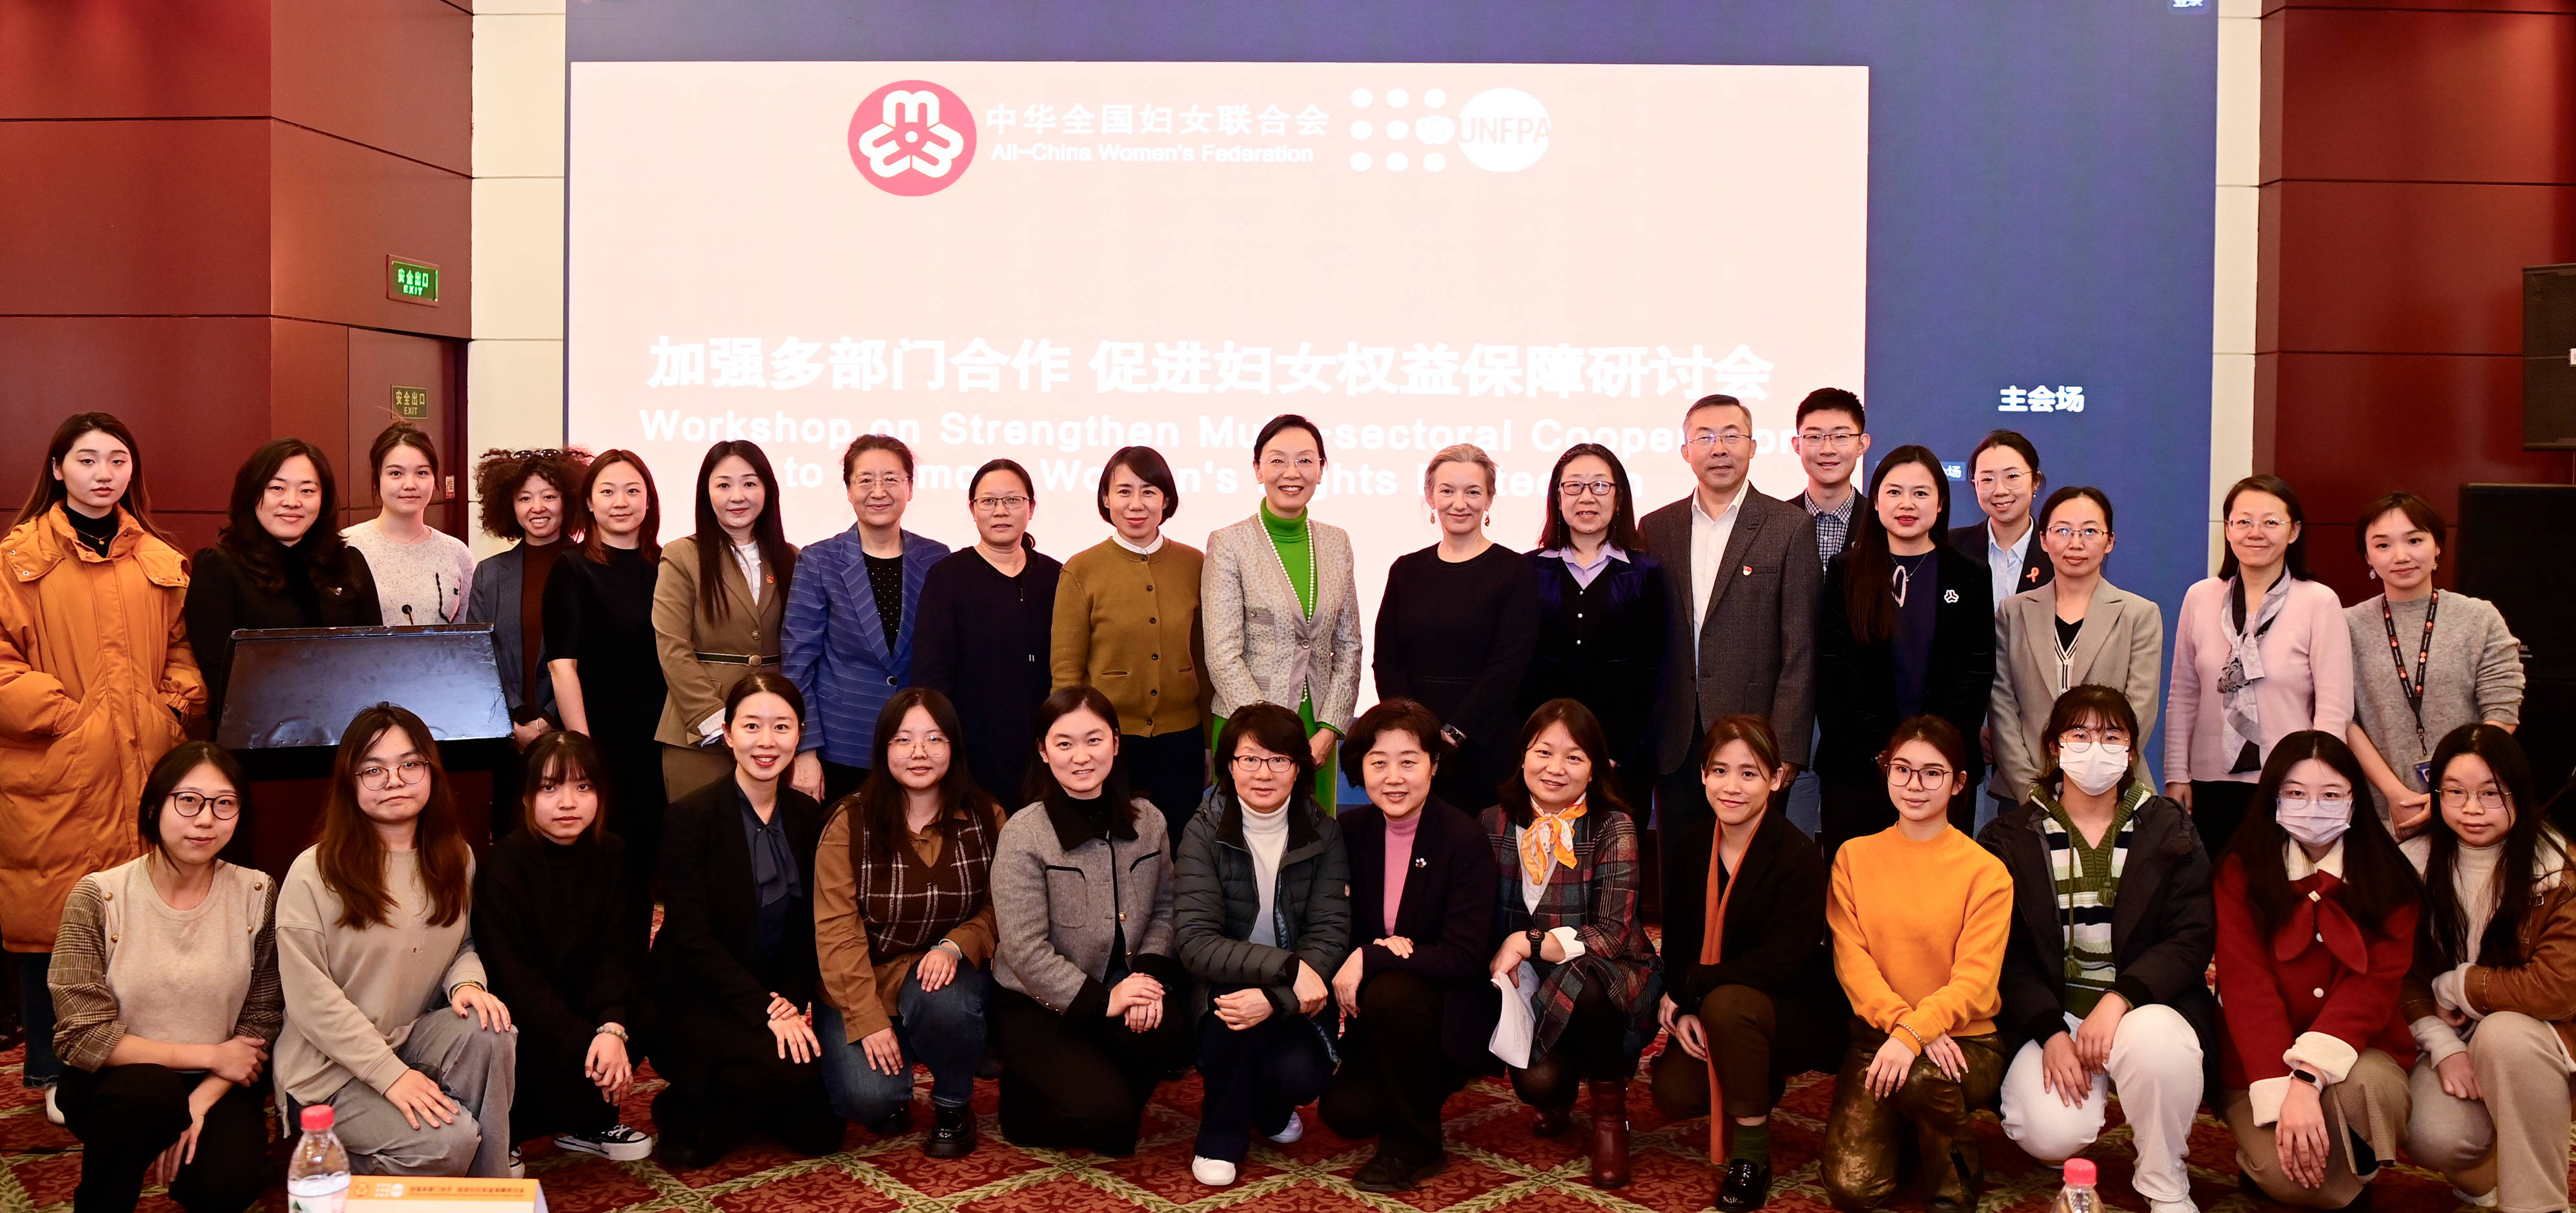 Workshop on Strengthening Multi-Sector Cooperation to Promote Women's Rights Protection Held in Beijing